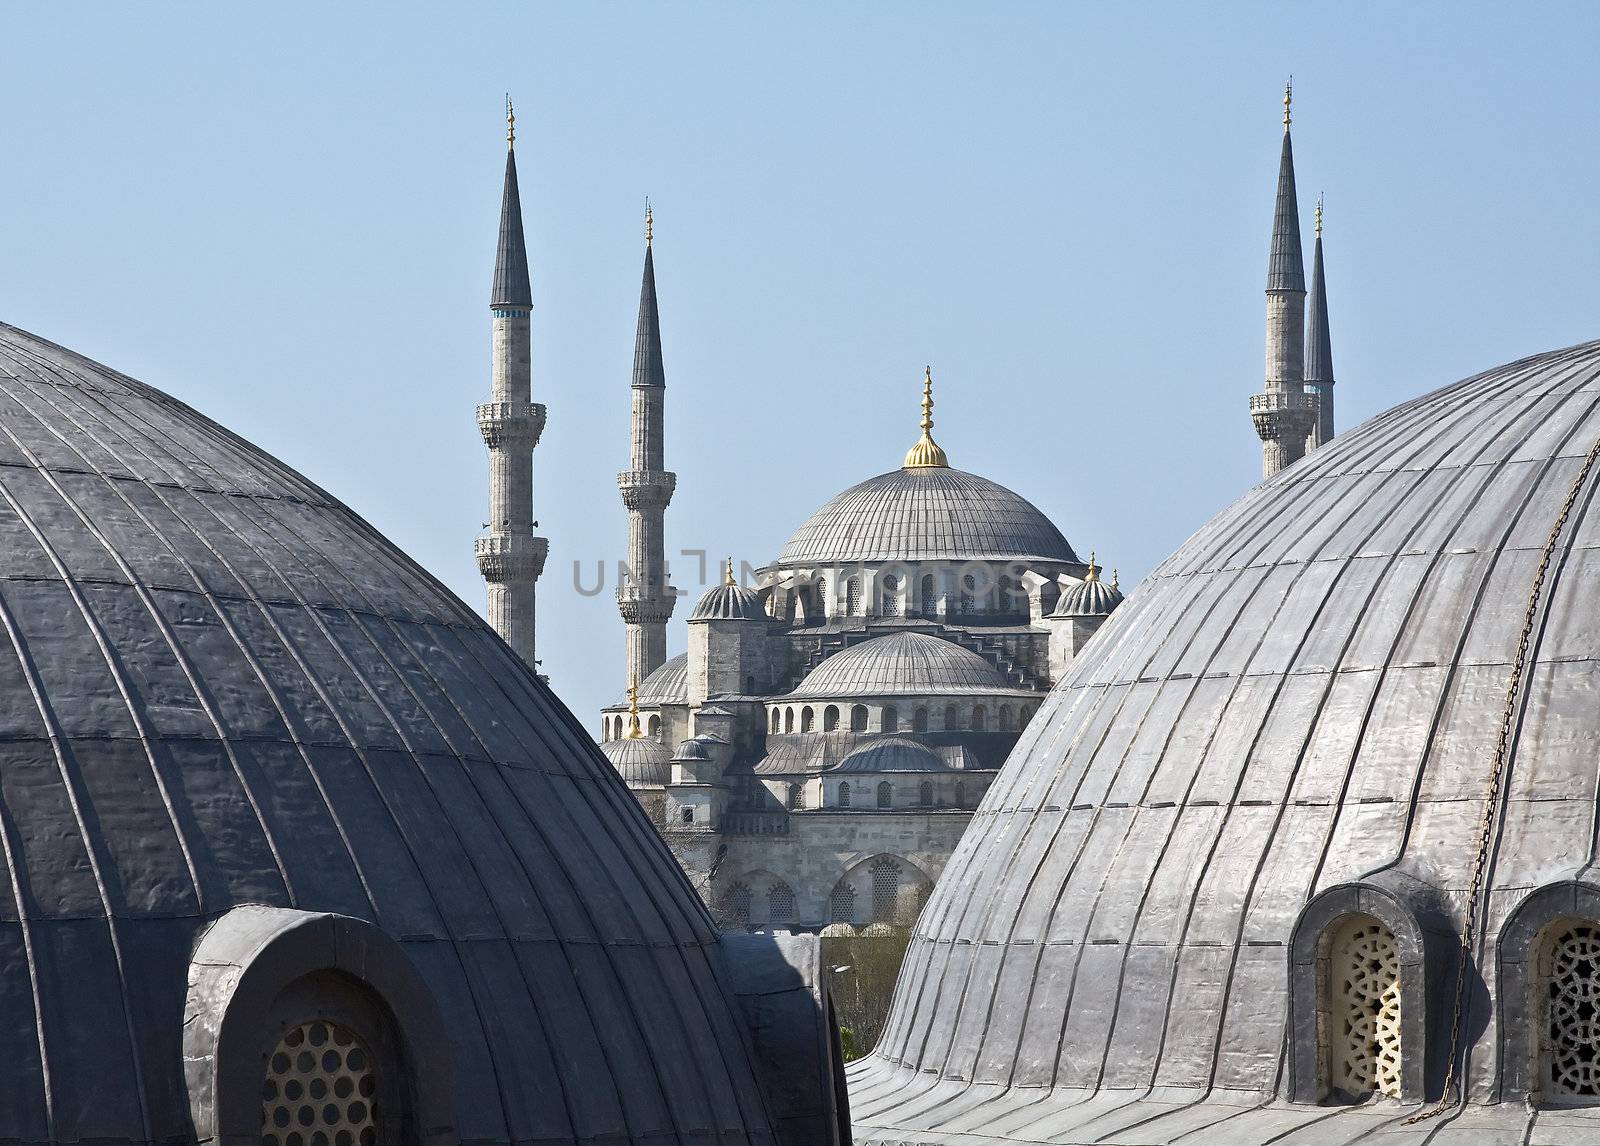 Famous "Blue" mosque in Istanbul, Turkey